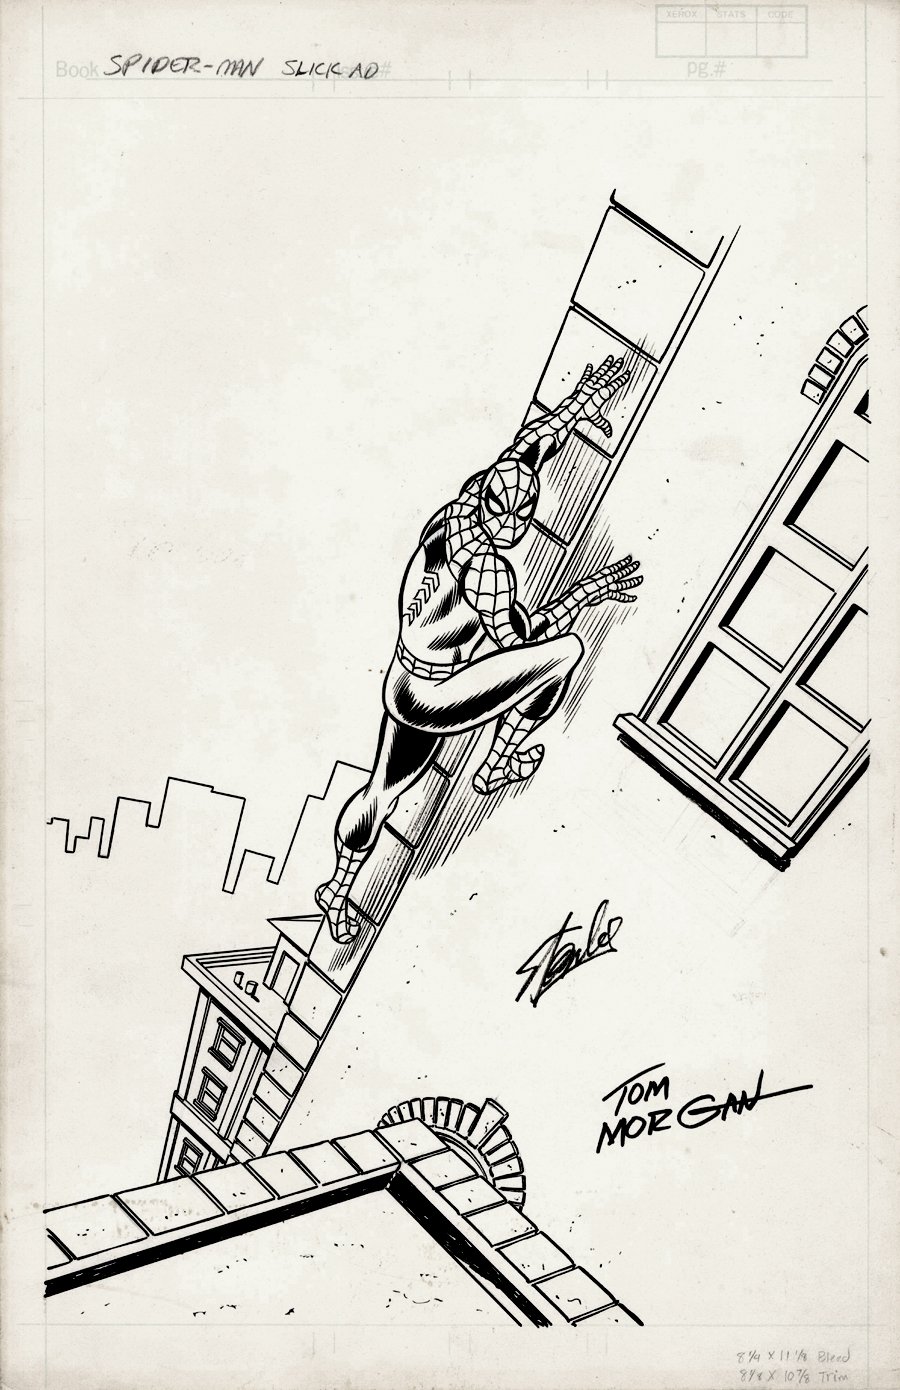 Image of Spider-Man PUBLISHED Advertising Pinup (SIGNED BY STAN LEE ALSO! Mid-1980s)